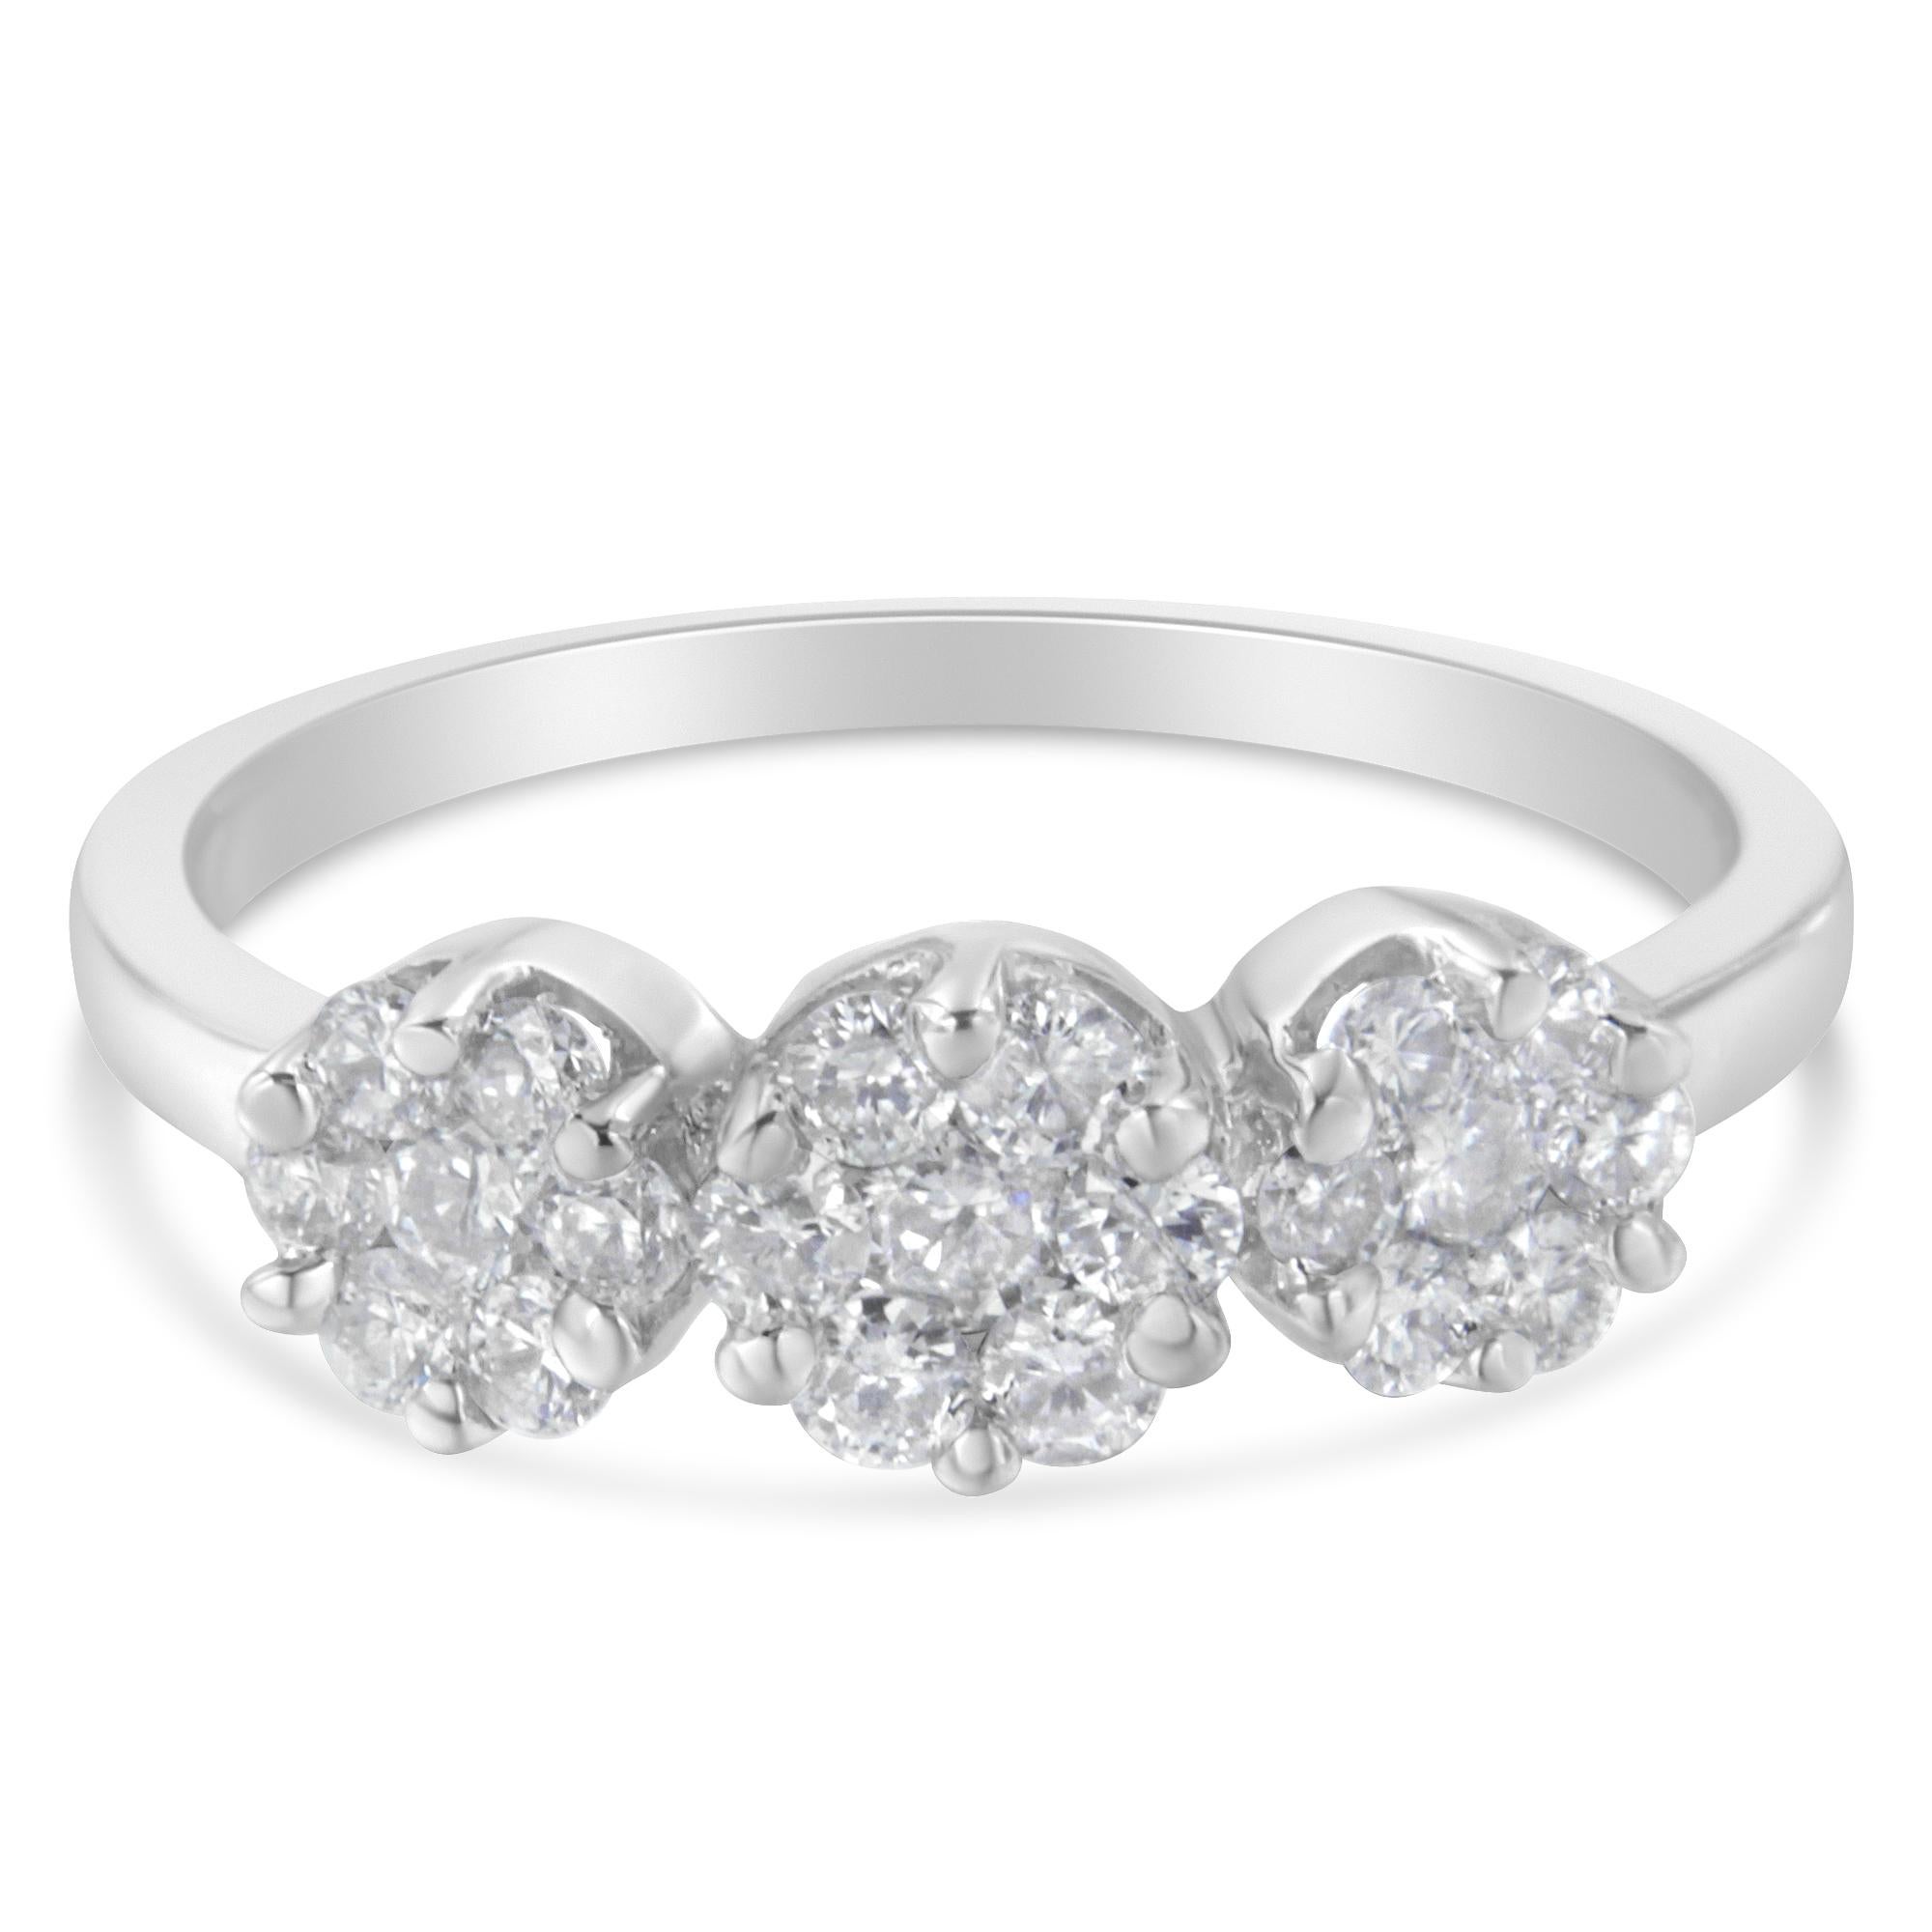 For Sale:  14K White Gold Three-Stone Cluster 0.7 Carat Diamond Ring 2